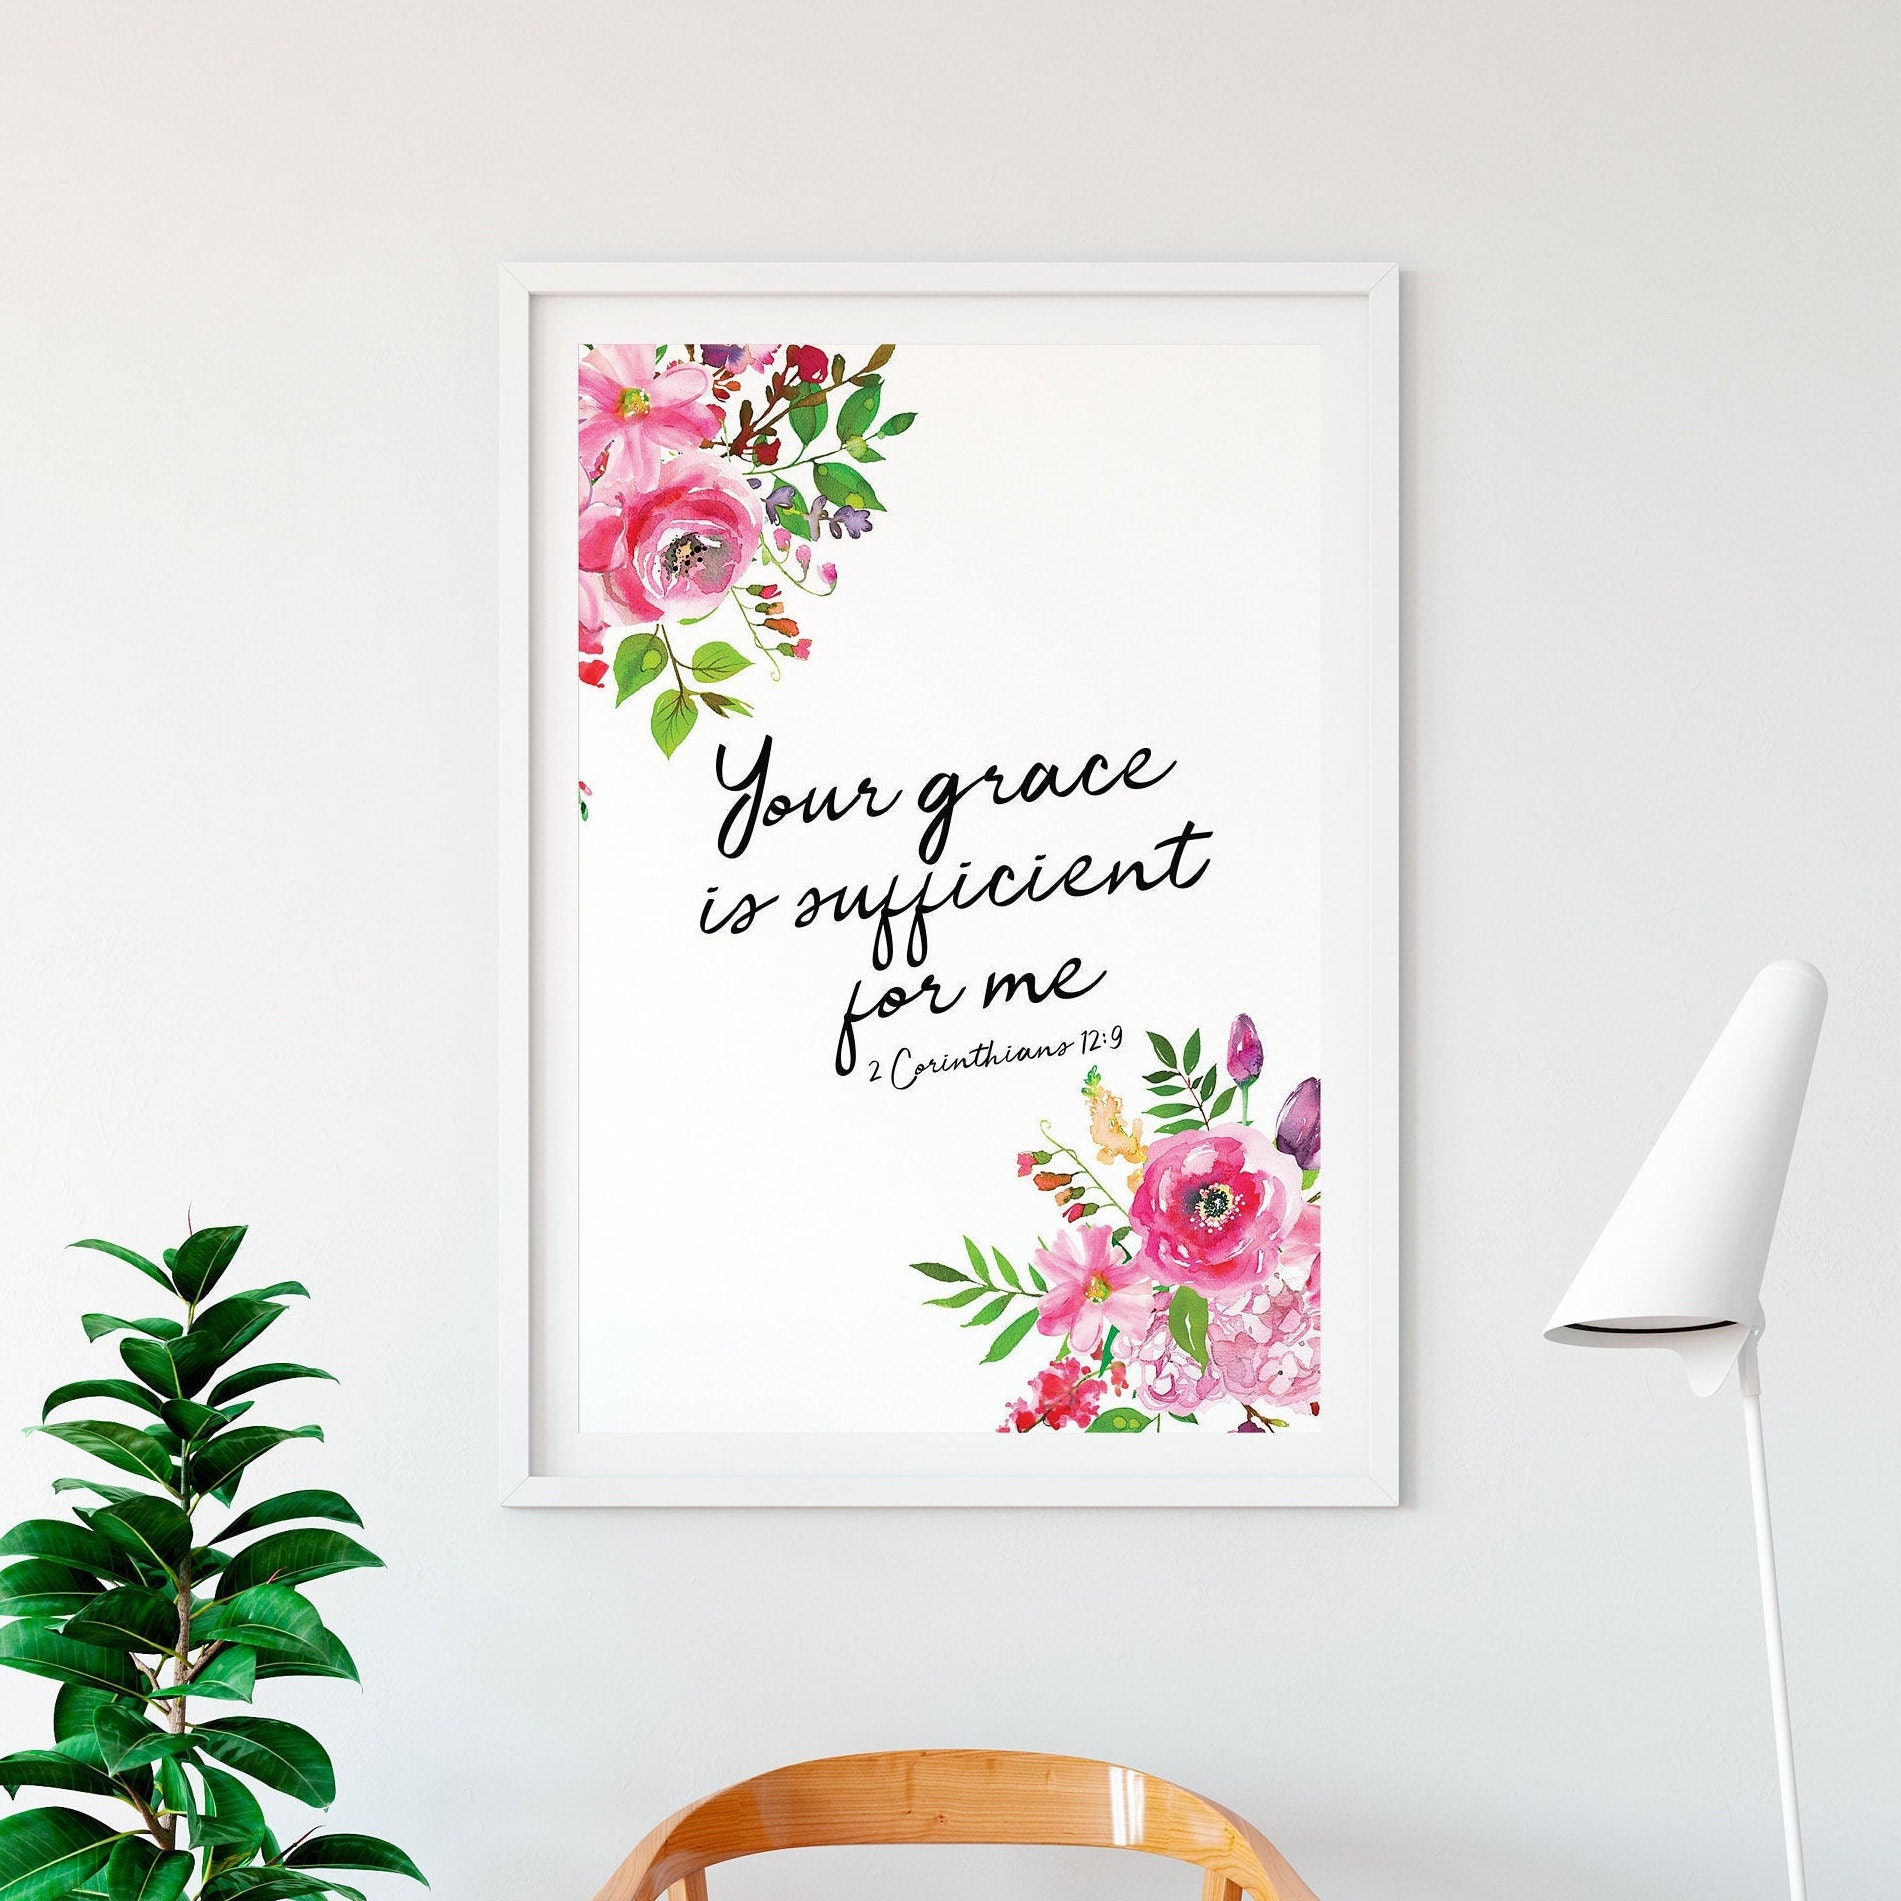 Your Grace Is Sufficient Bible Verse Print Wall Art Quotes 2 Corinthians 12:9